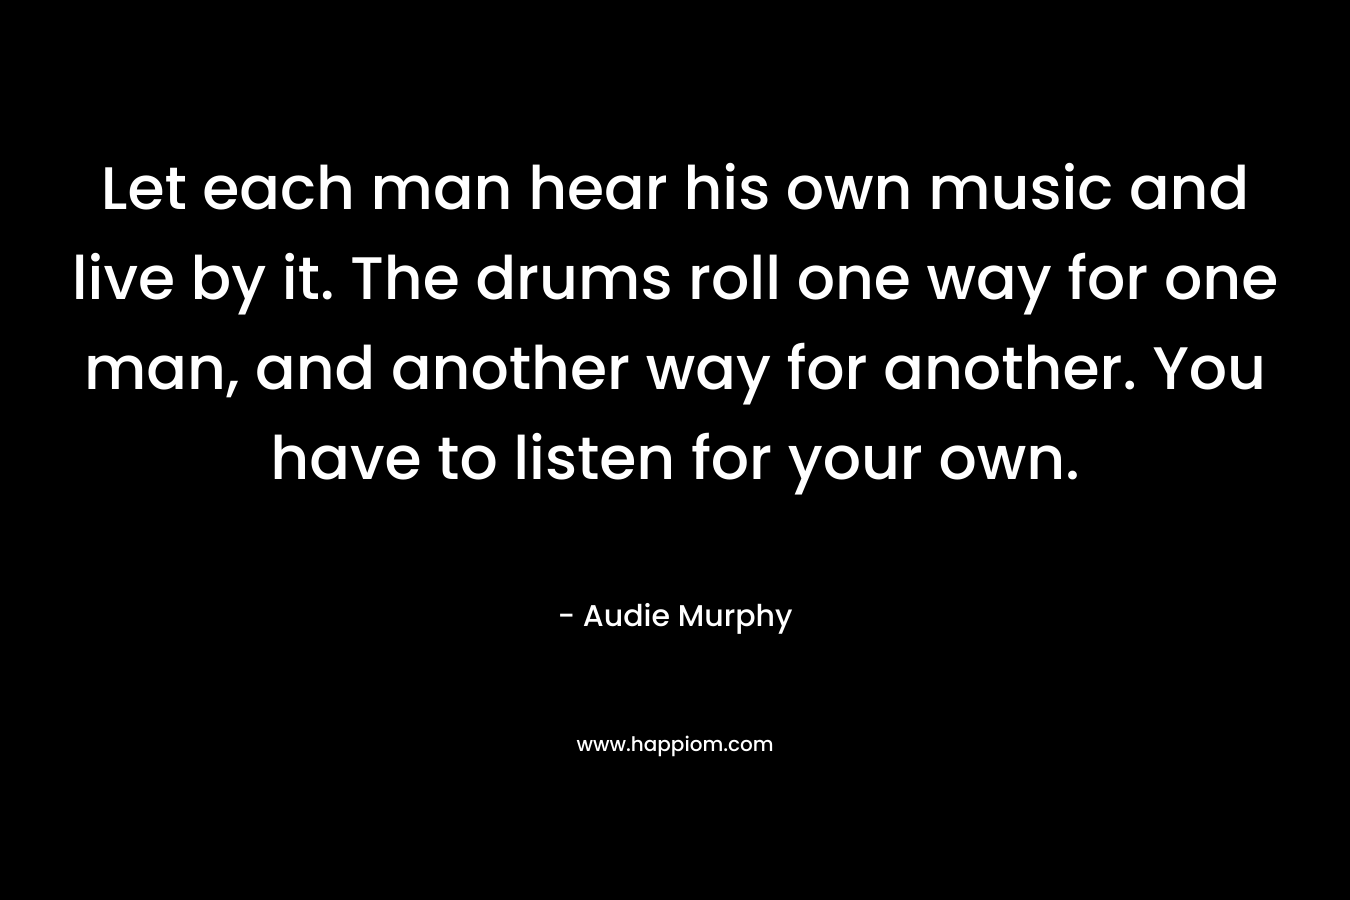 Let each man hear his own music and live by it. The drums roll one way for one man, and another way for another. You have to listen for your own. – Audie Murphy